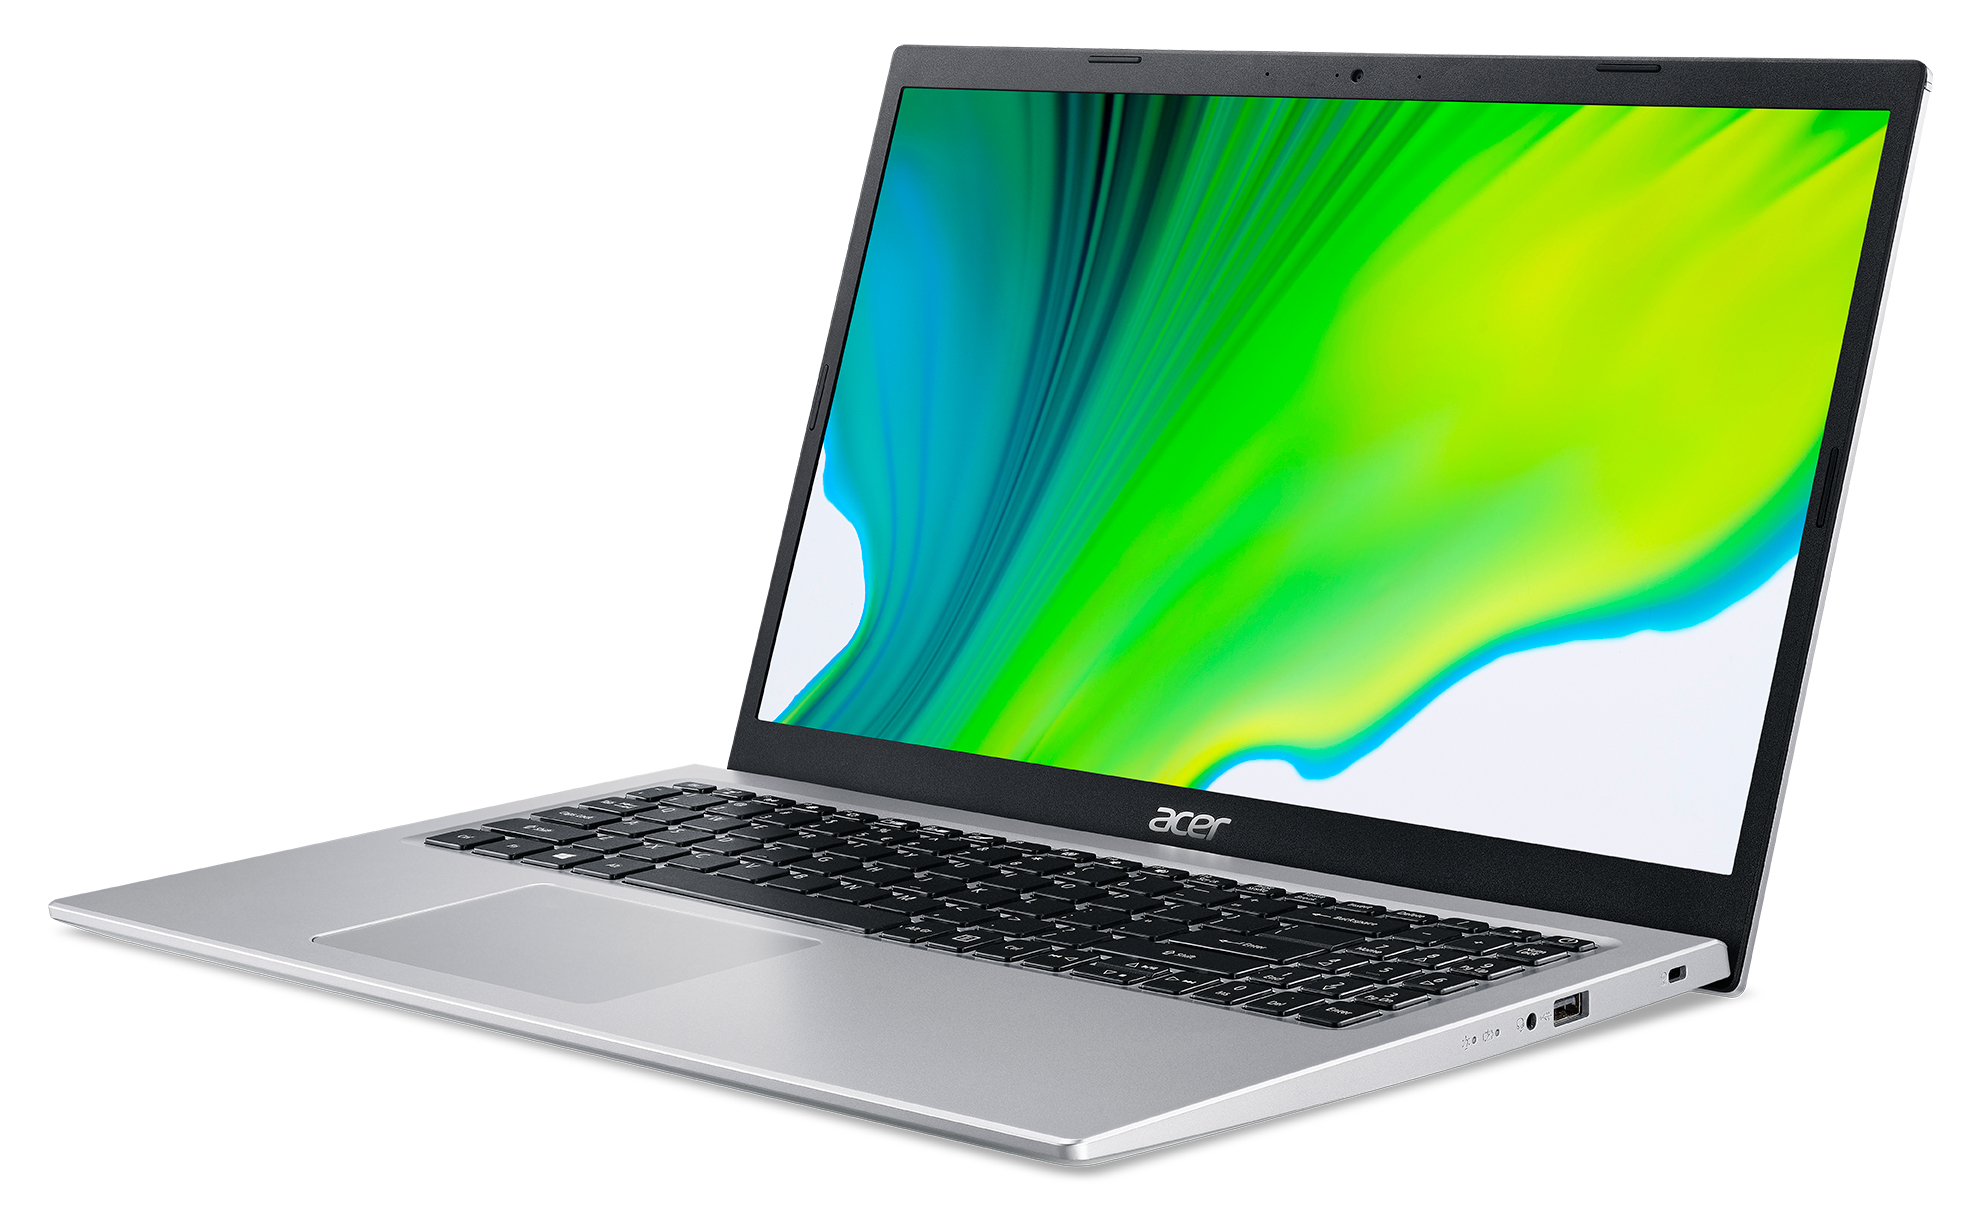 ACER Acer Aspire 5 (A515-56-560W), GB Intel® Zoll mit Intel GB Xe 512 SSD, Display, Iris Graphics, Silber Prozessor, Core™ RAM, 15,6 Notebook i5 8